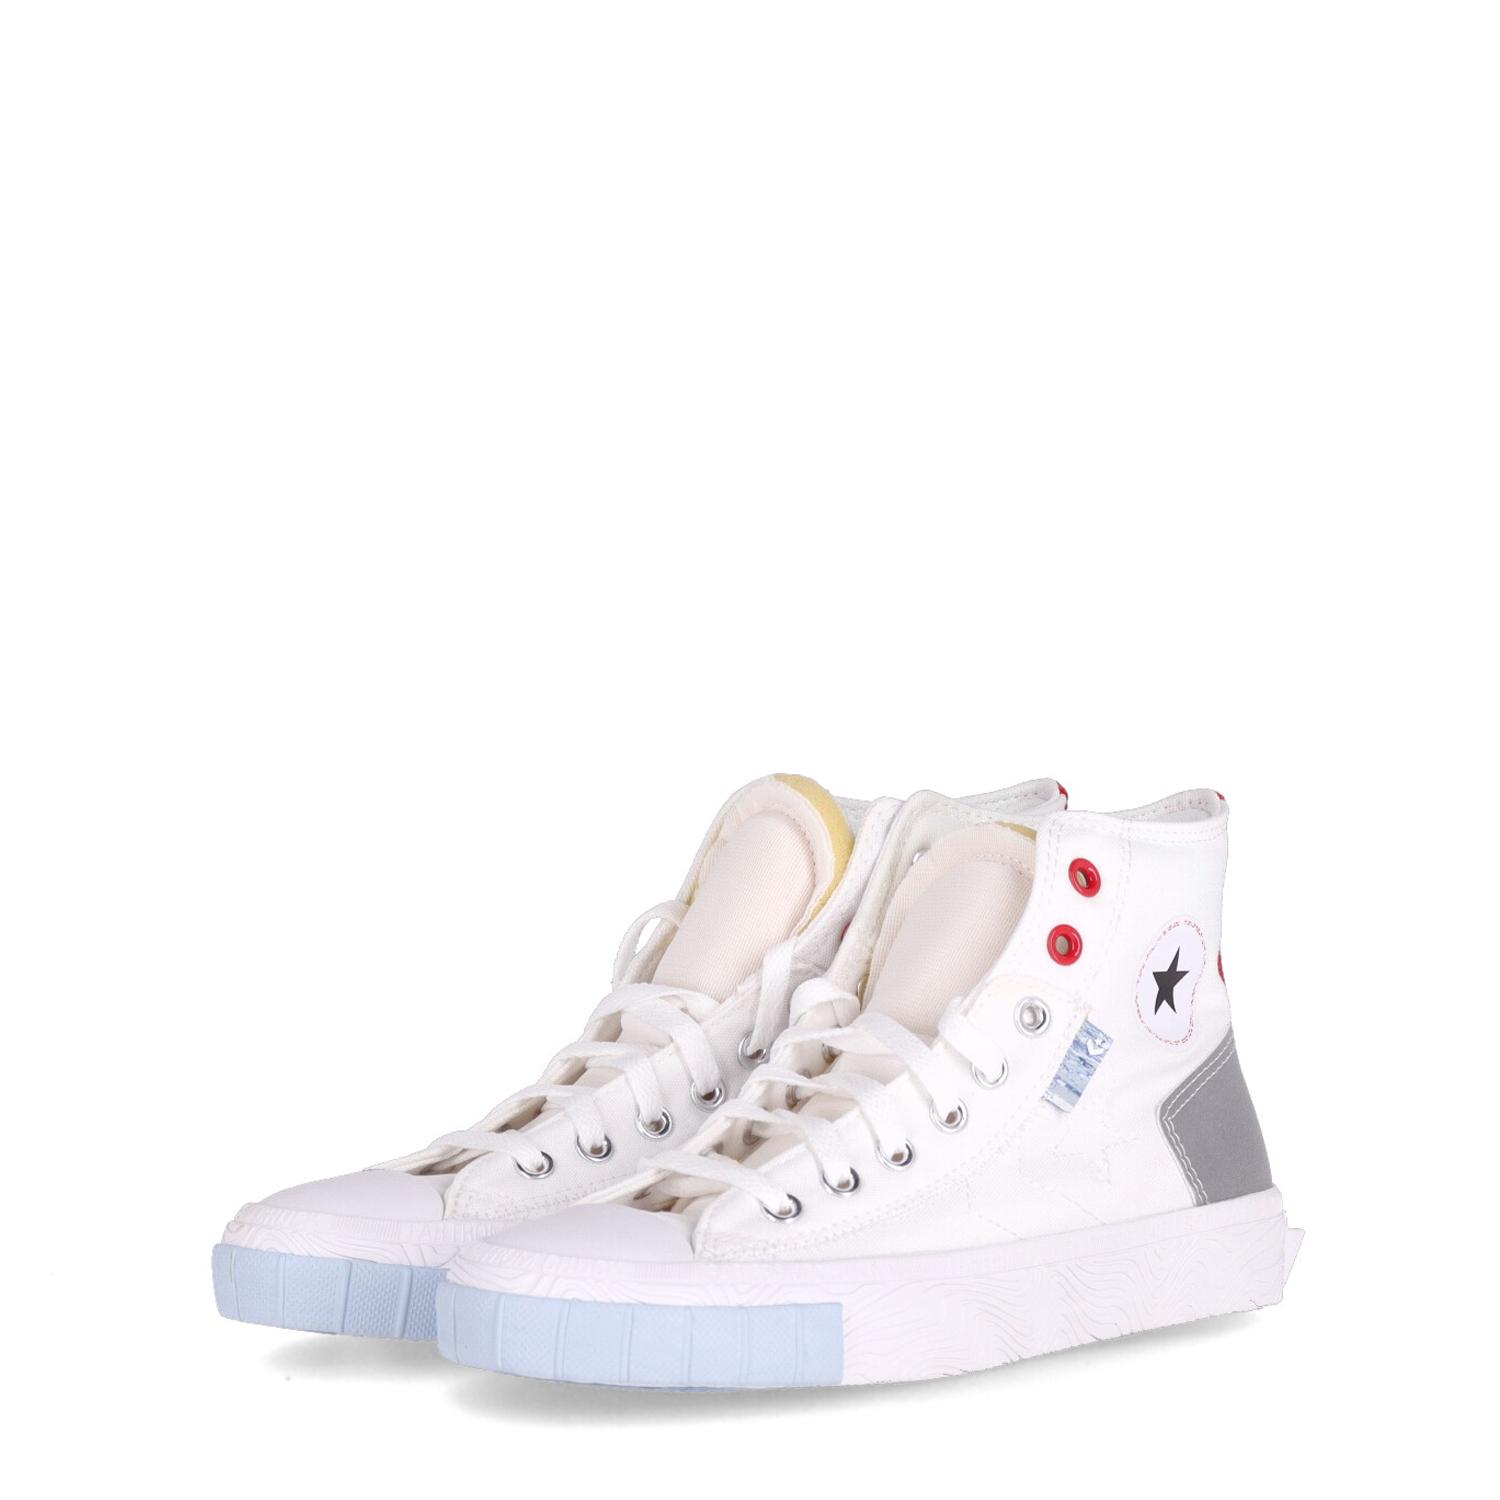 Converse Chuck Taylor Alt Star Future Metals WHITE RED LT ARMORY BLUE 